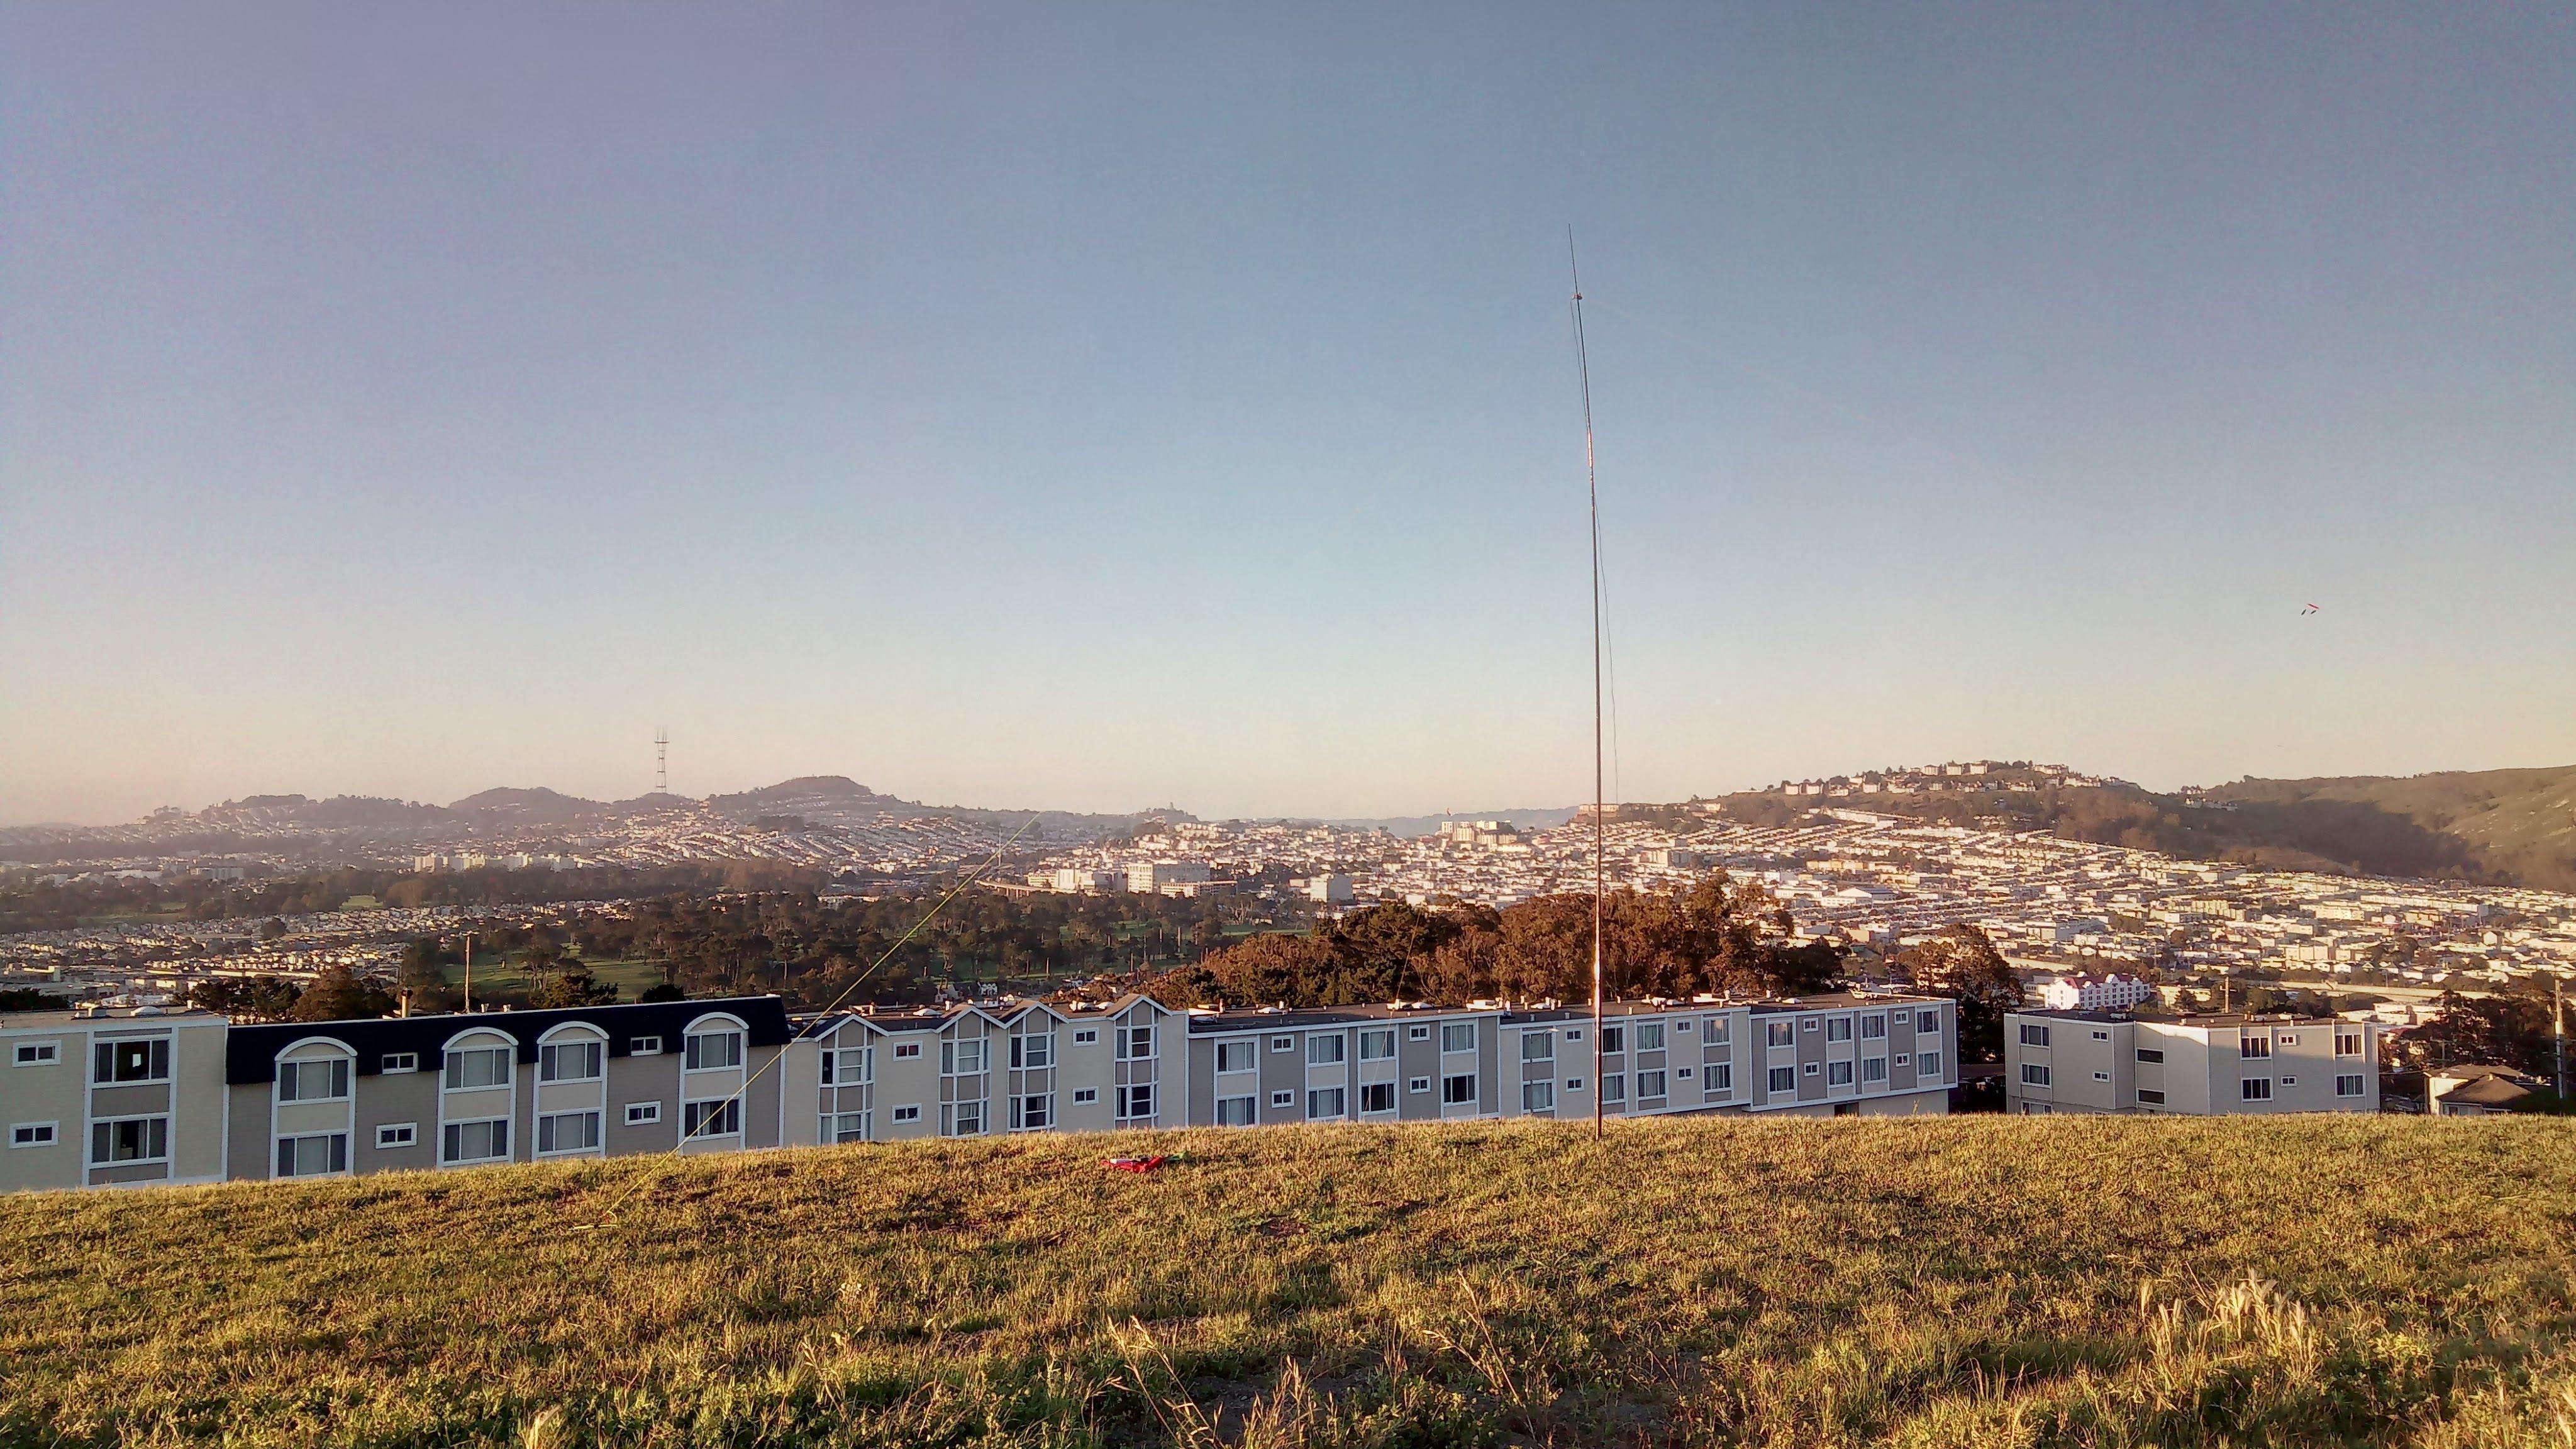 My humble dipole and Twin Peaks with Sutro Tower in the background - testing WSPR mode